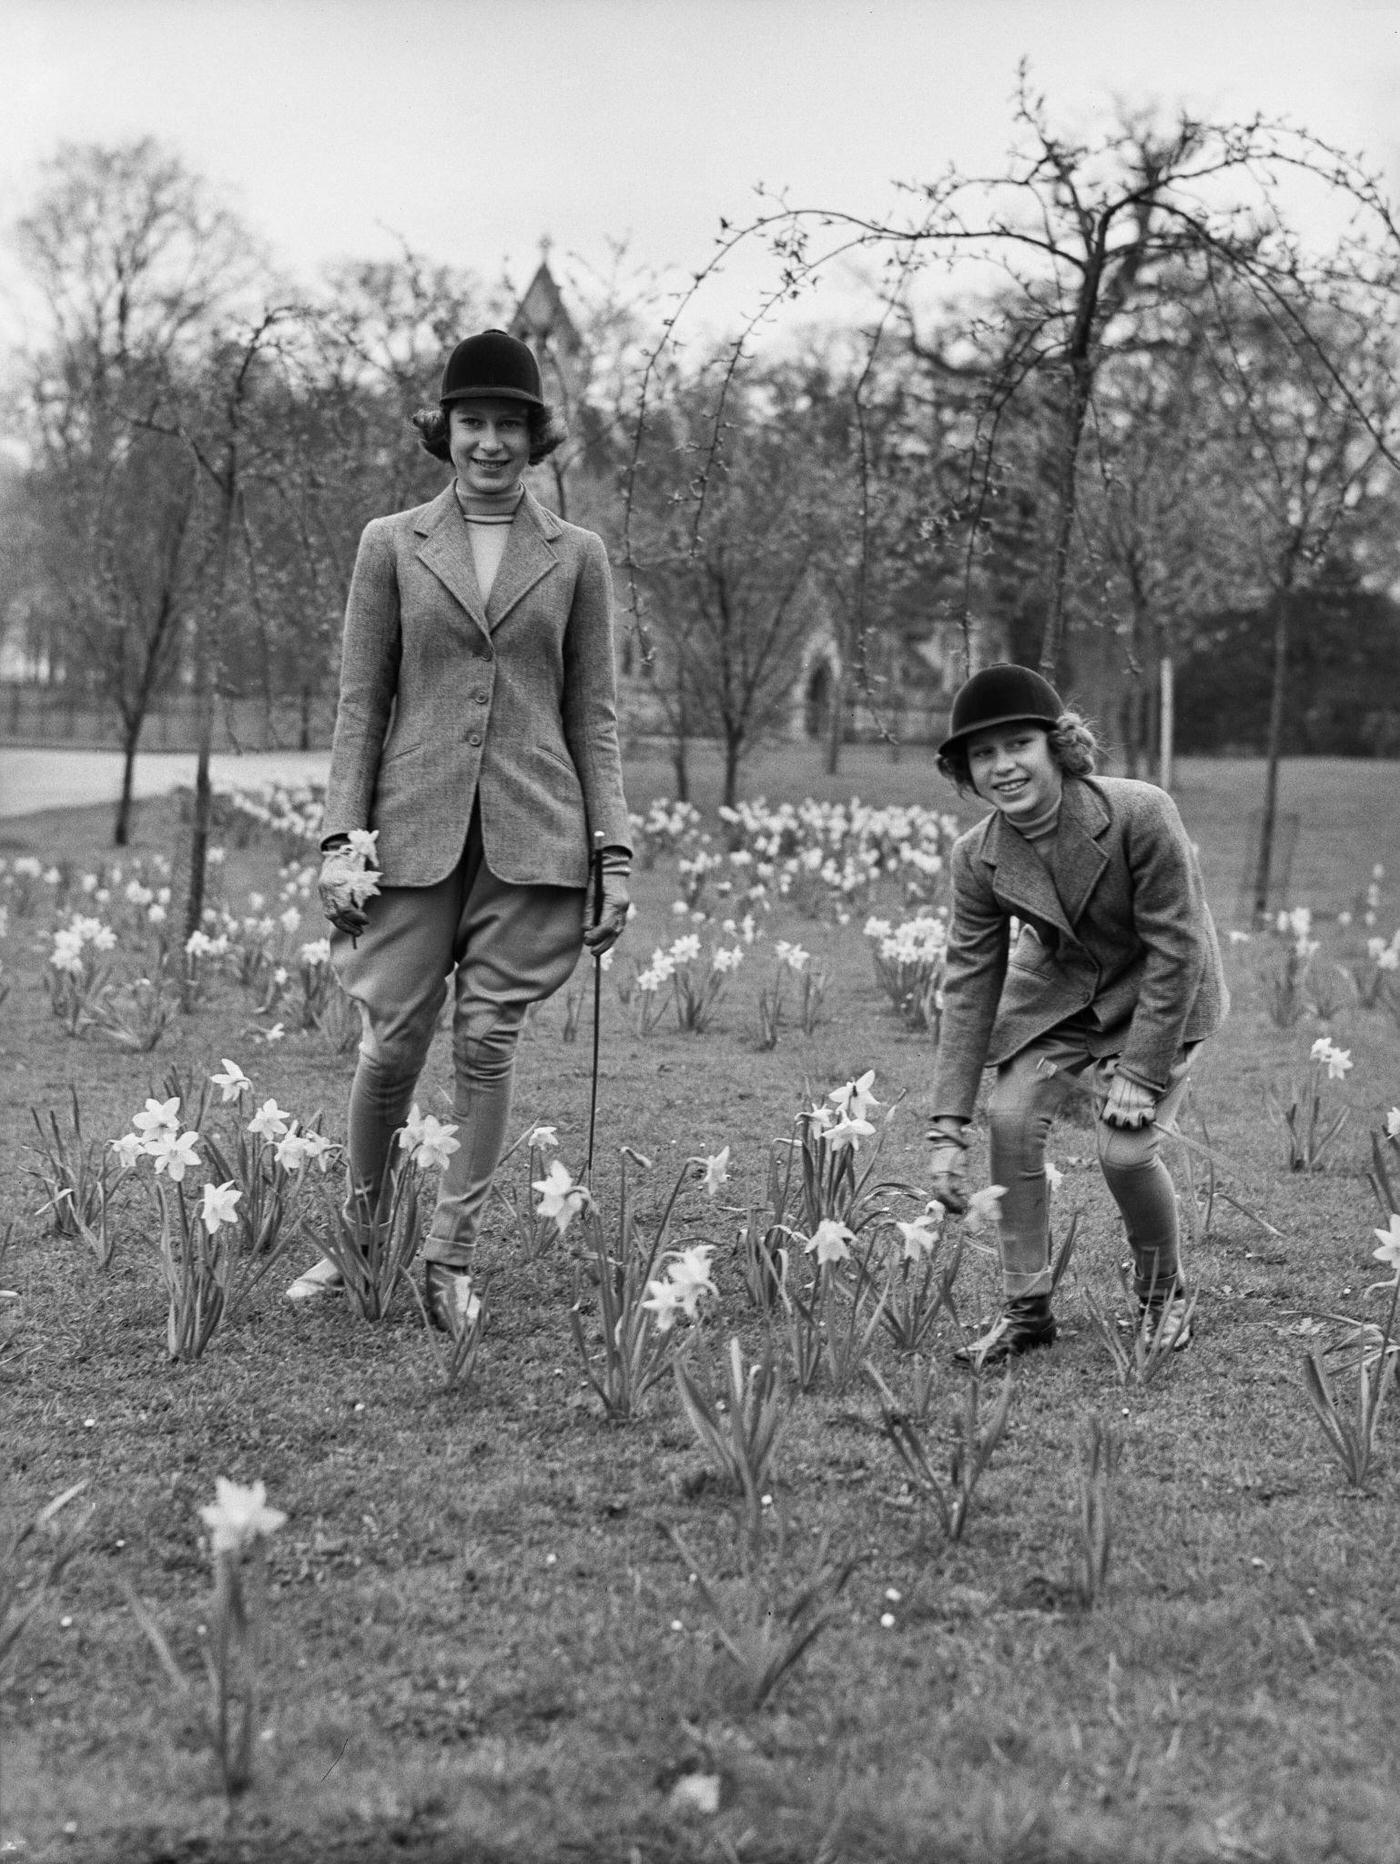 The Royal Princesses Elizabeth and Margaret in horsewomen clothes standing in a daffodils field, UK, 1940.